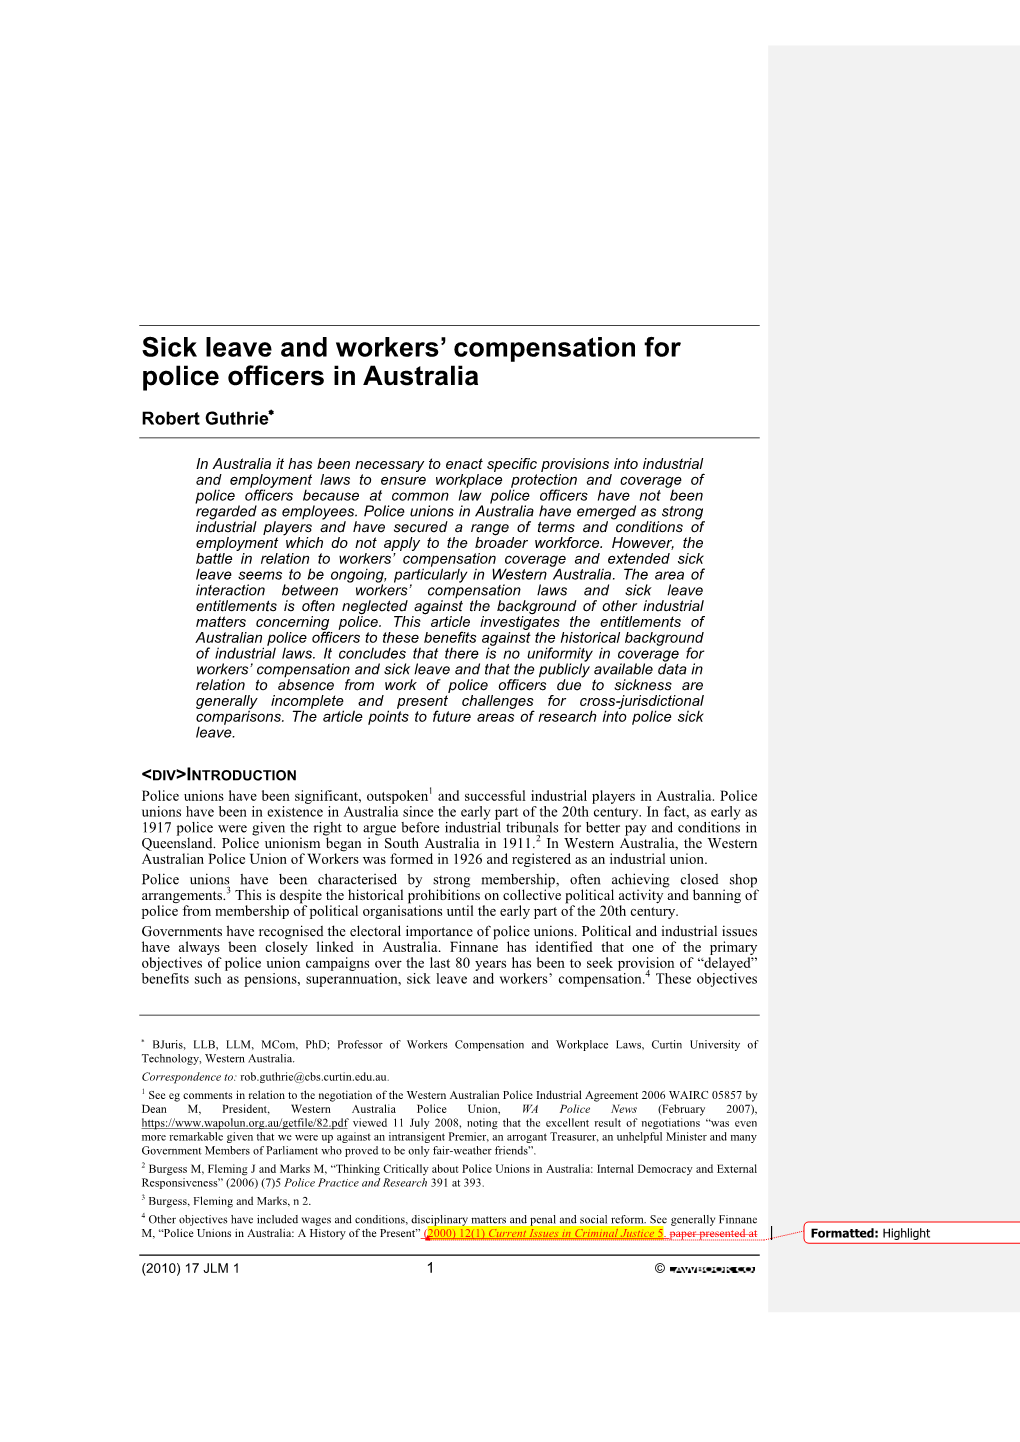 Sick Leave and Workers' Compensation for Police Officers in Australia